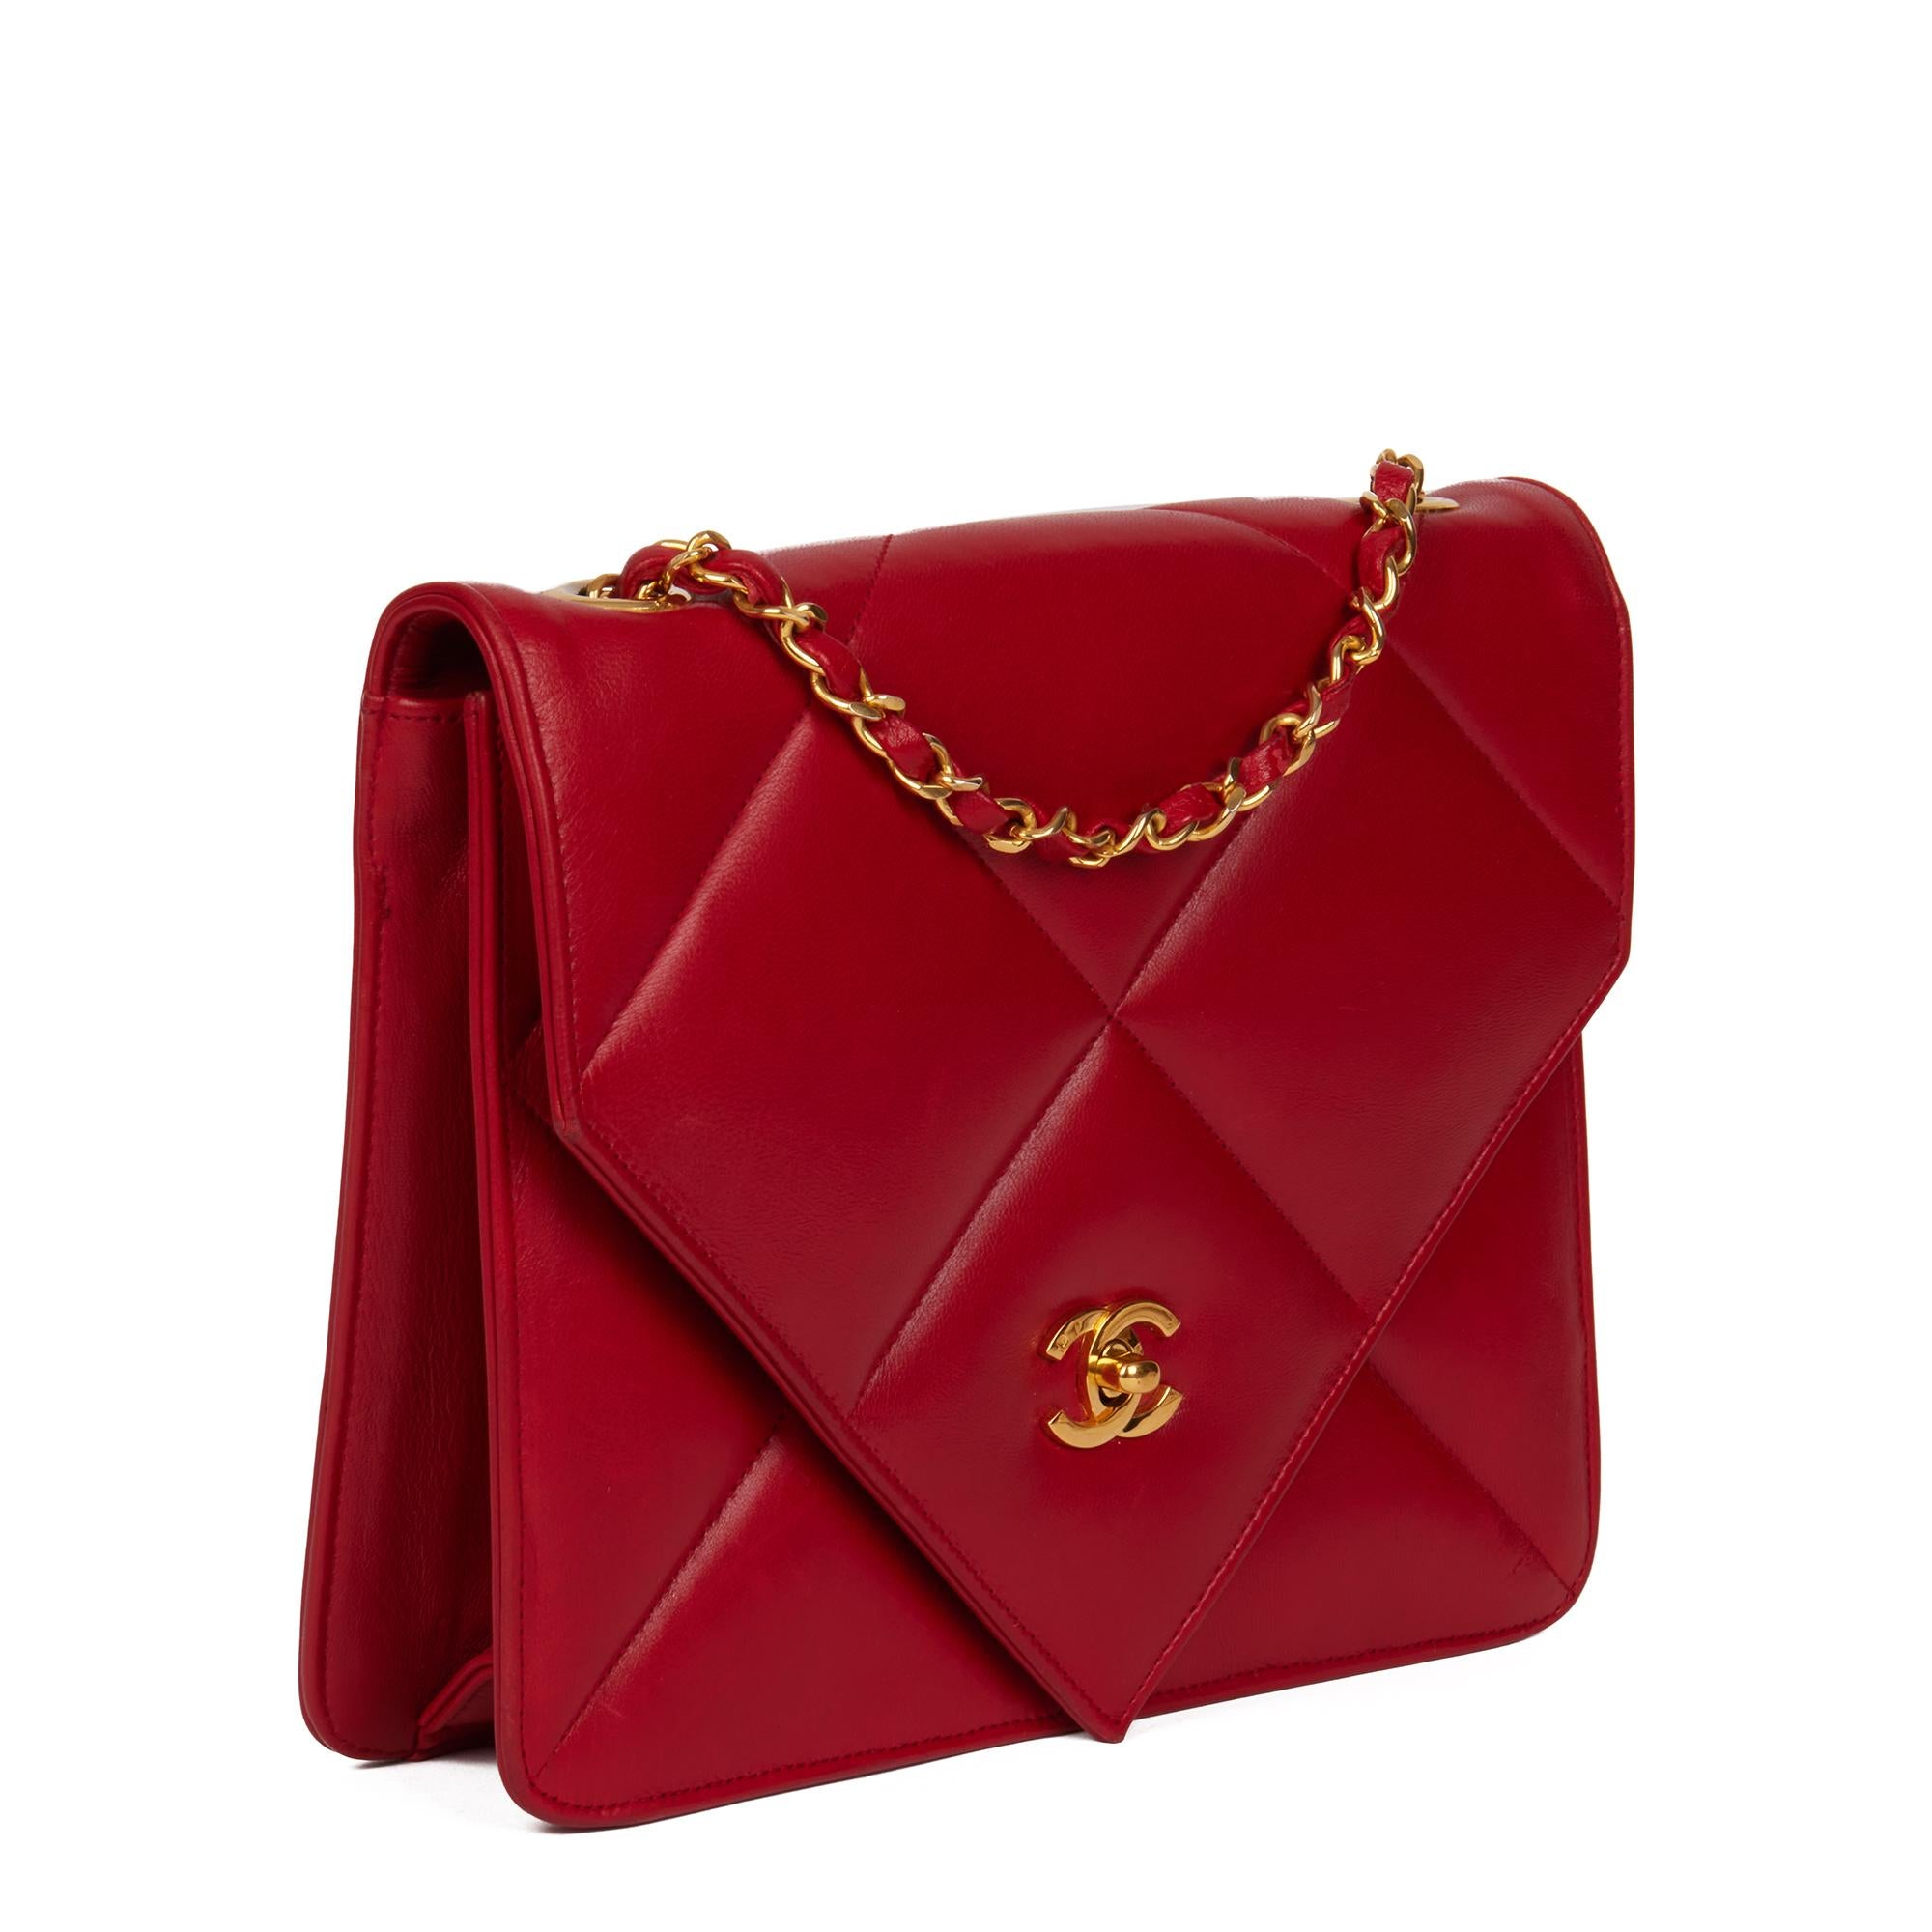 CHANEL
Red Quilted Lambskin Vintage Classic Single Flap Bag

Xupes Reference: HB4333
Serial Number: 0501470
Age (Circa): 1989
Accompanied By: Chanel Dust Bag
Authenticity Details: Serial Sticker (Made in France)
Gender: Ladies
Type: Shoulder,